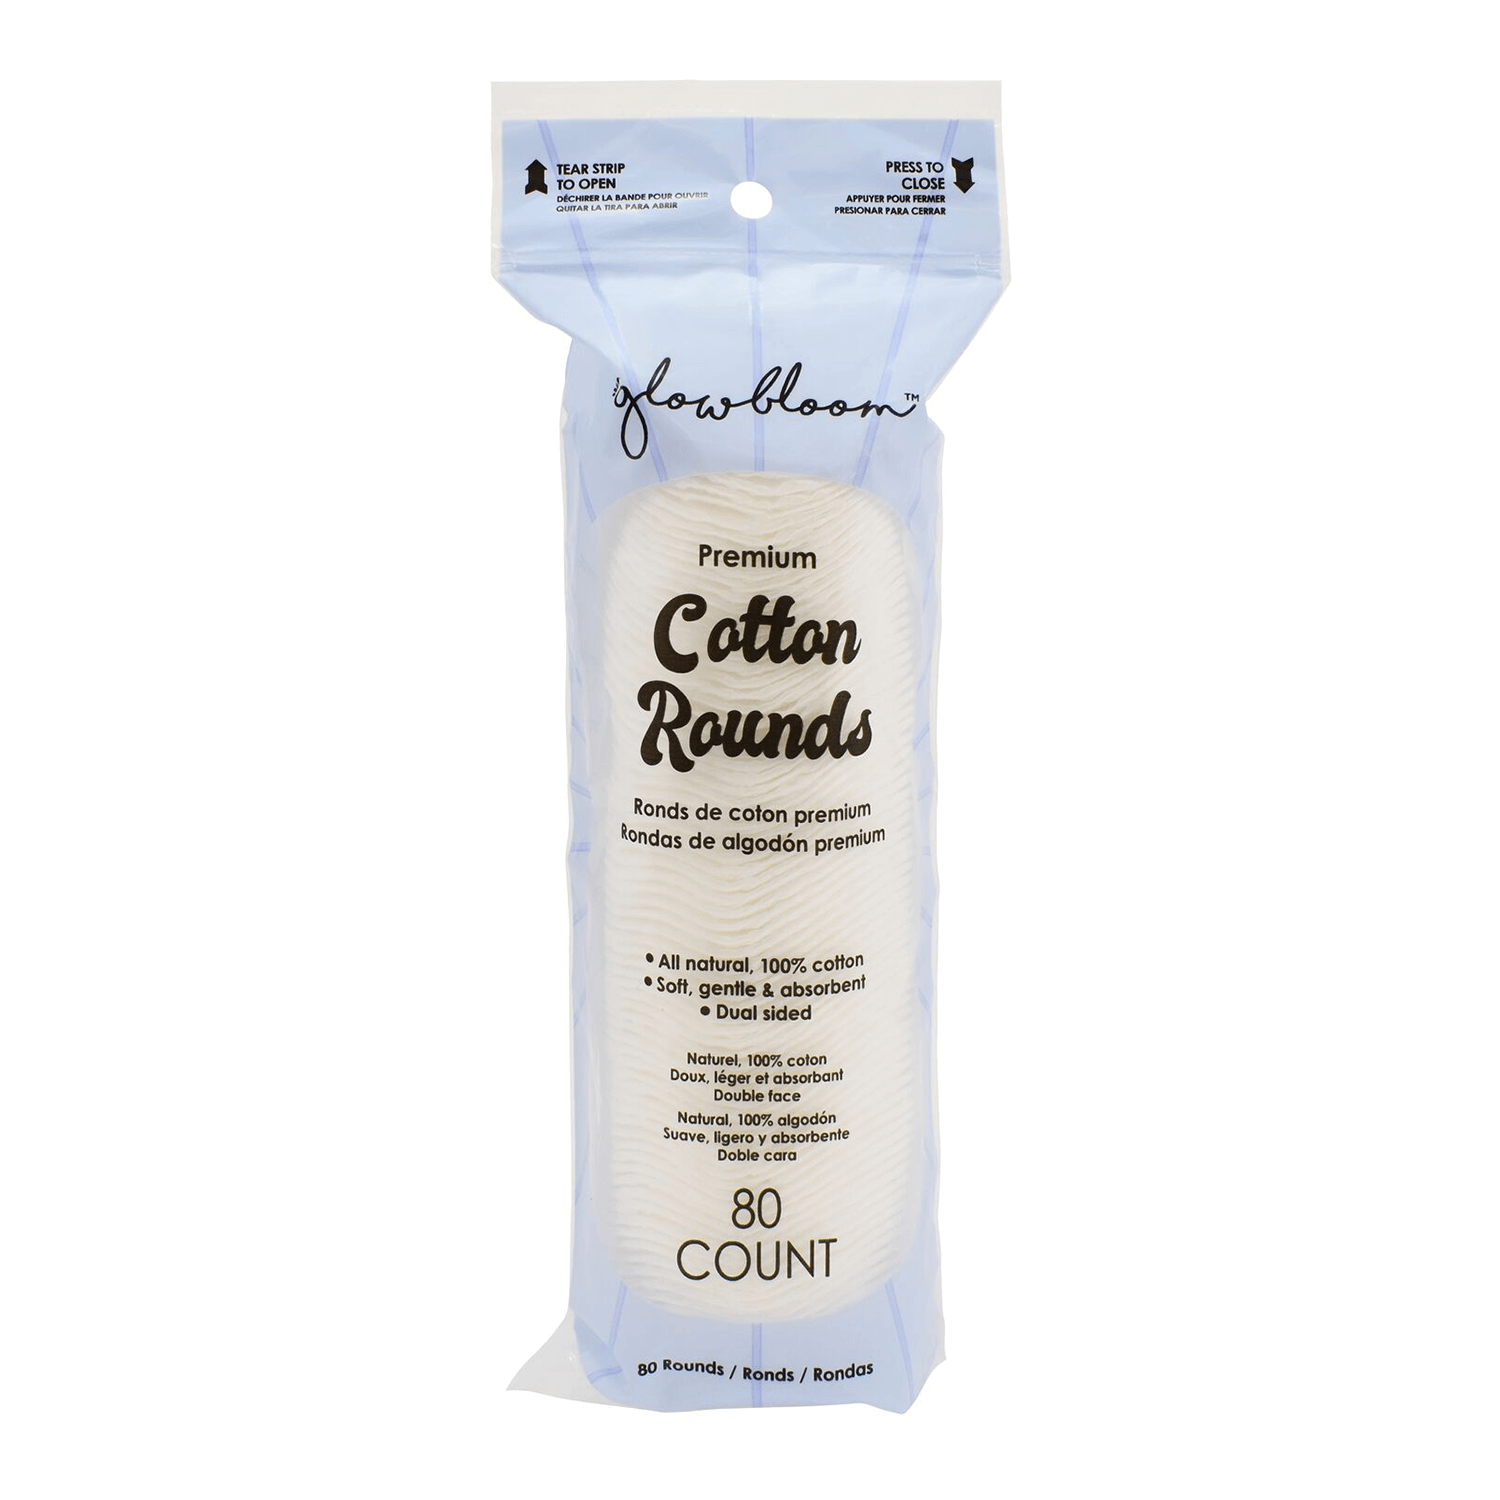 Equate Beauty Cotton Rounds, 100 Count